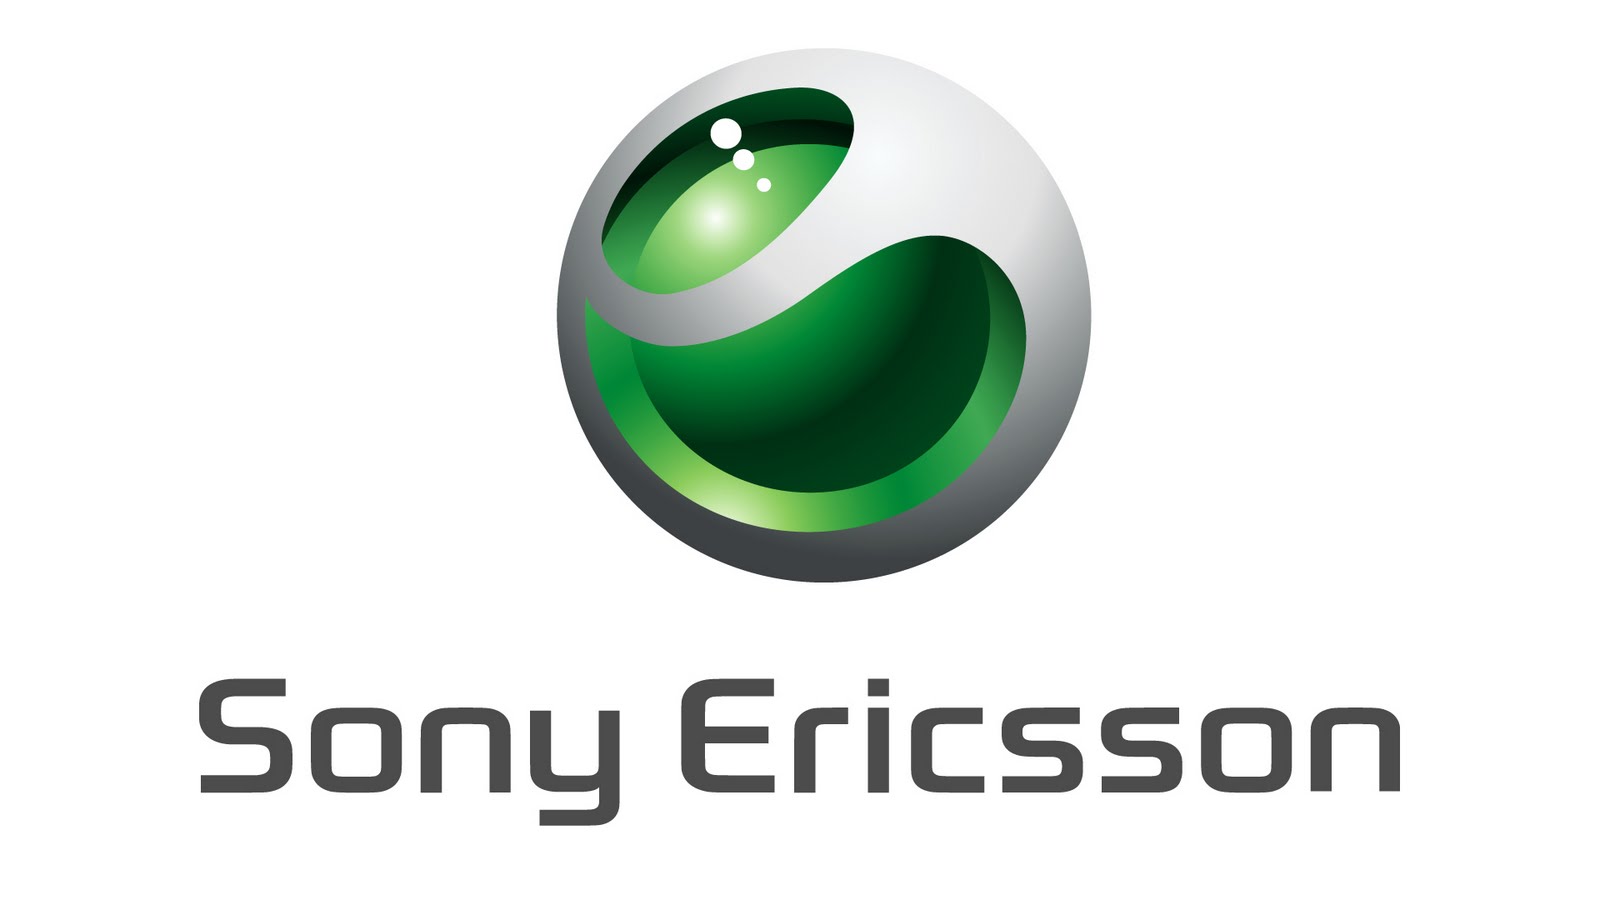 Sony Ericsson Logo Wallpapers | New Best Wallpapers 2011 ...